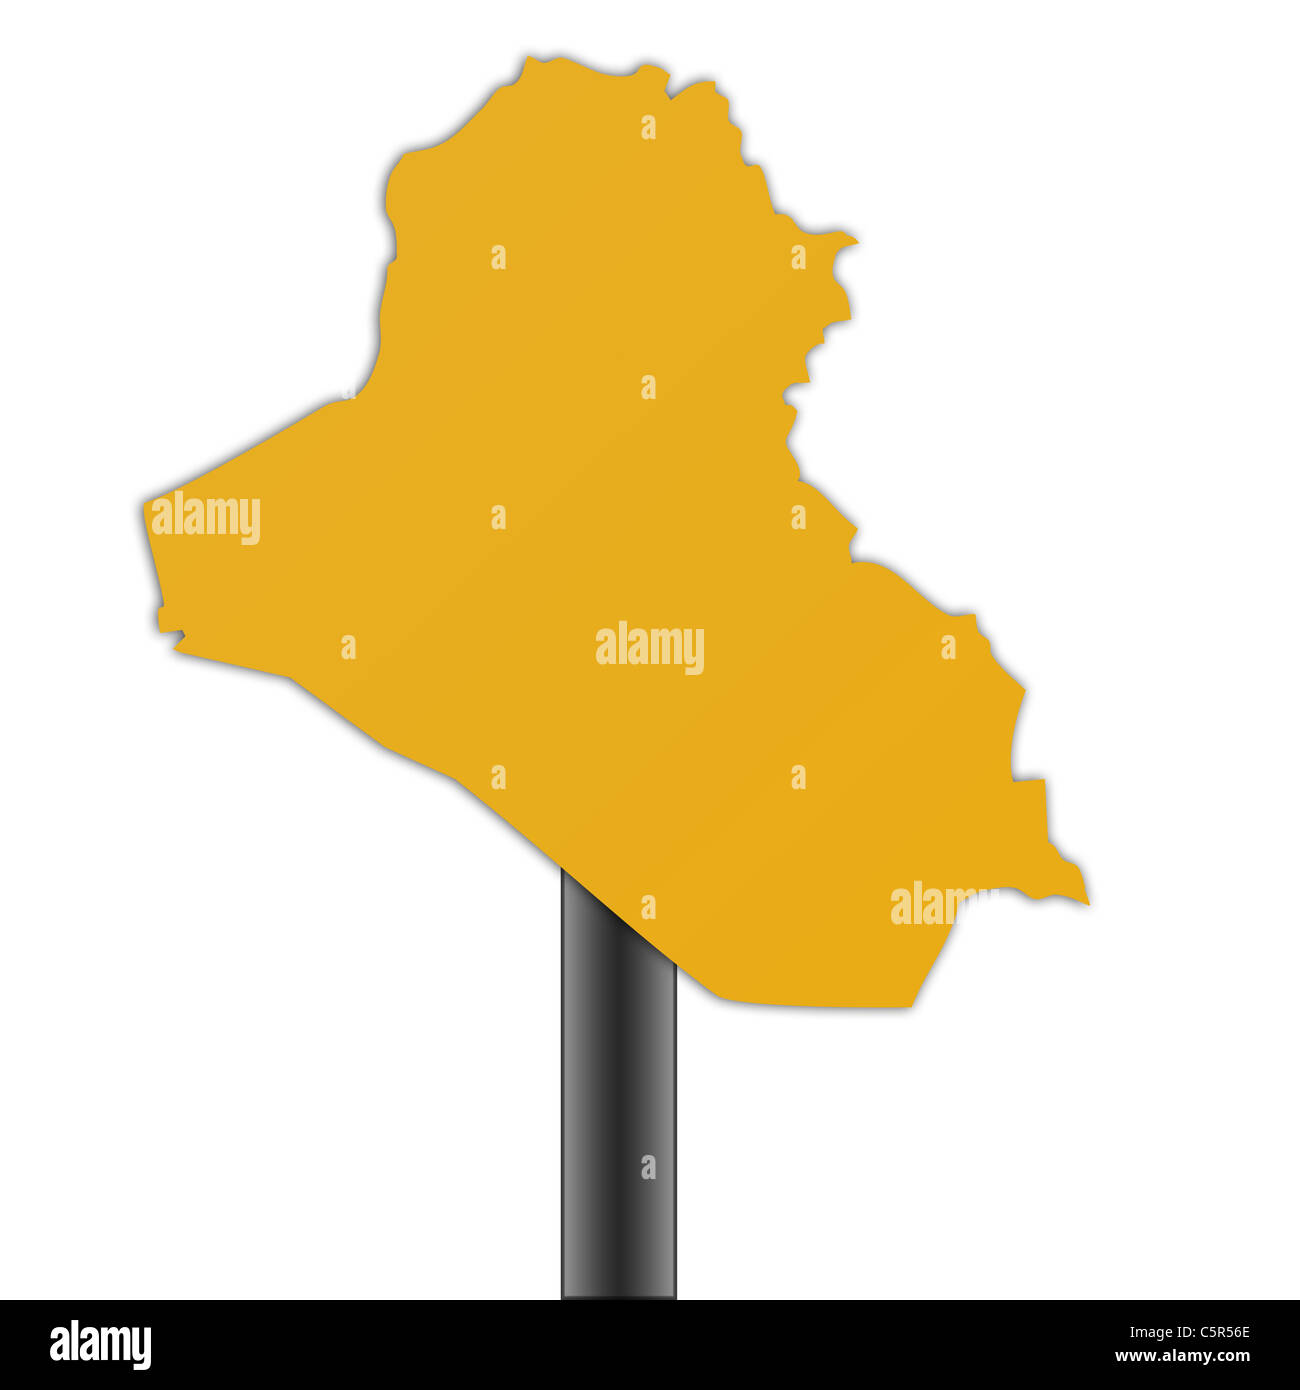 Iraq map road sign isolated on a white background. Stock Photo